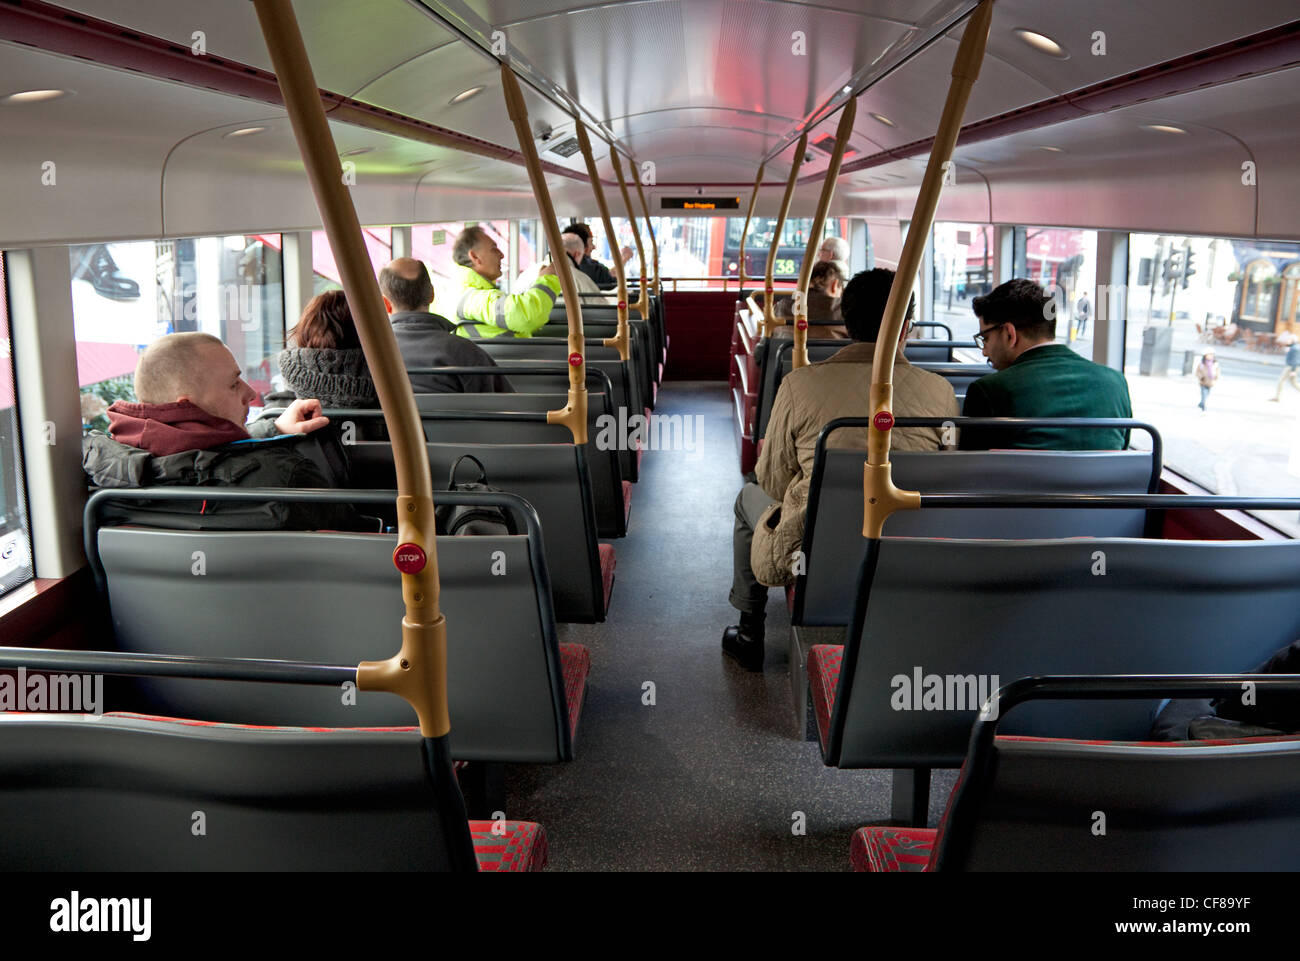 New Routemaster Bus London Upper Deck Stock Photo